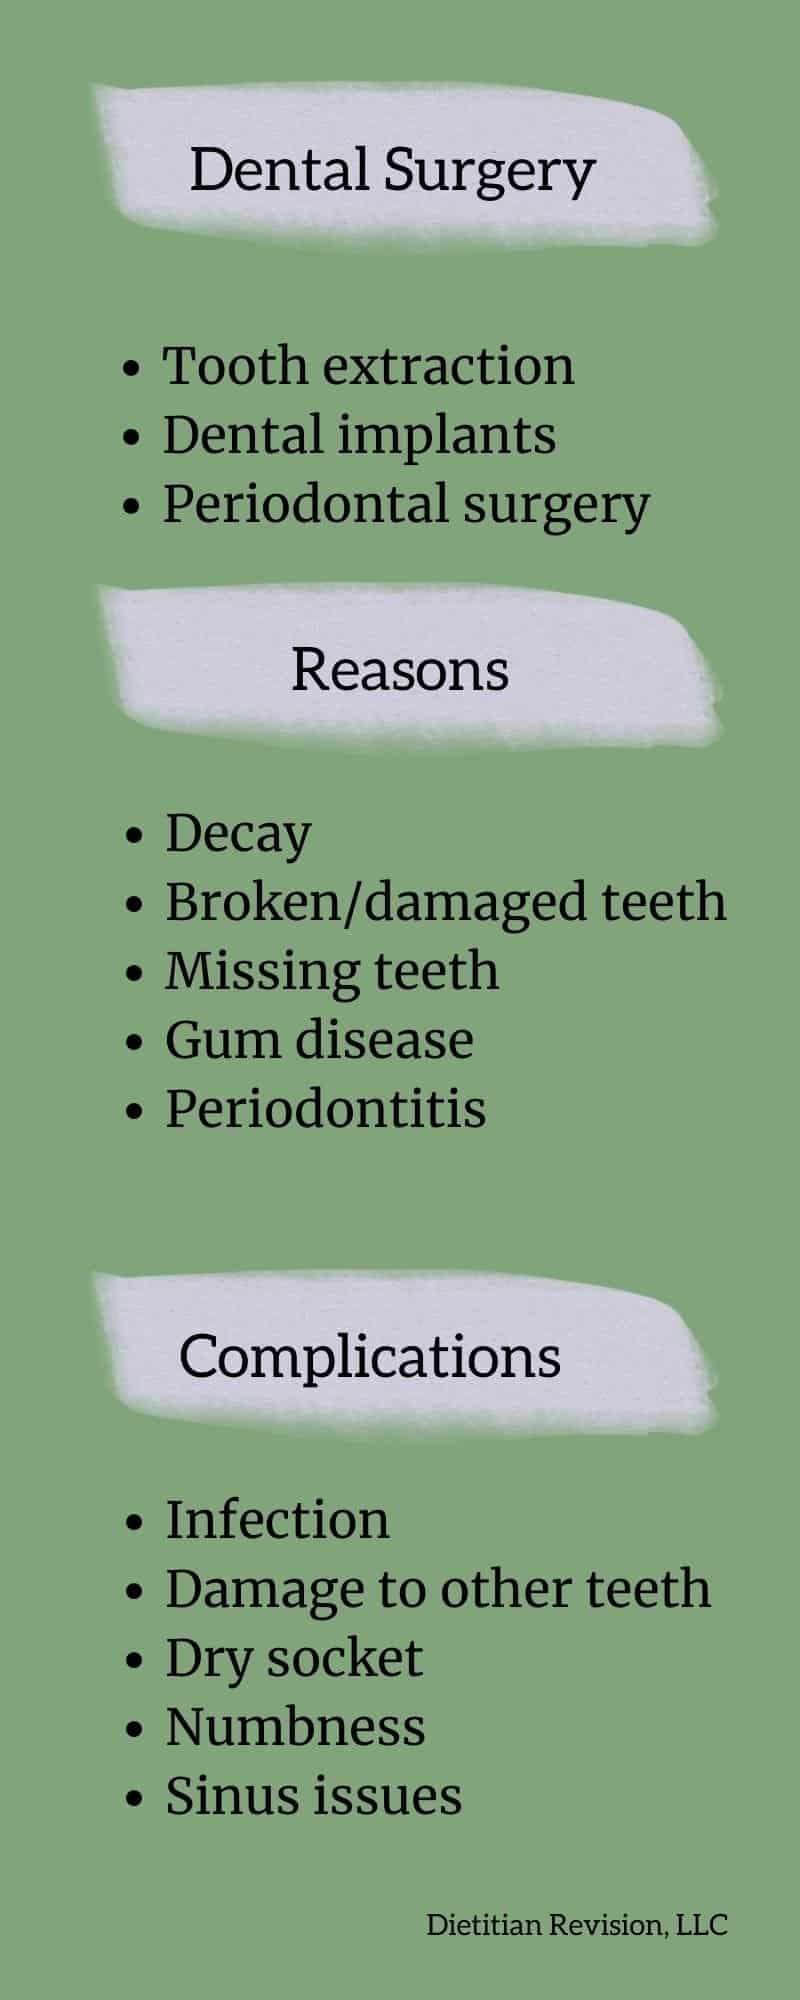 List of dental surgery types, reasons, and complications. 